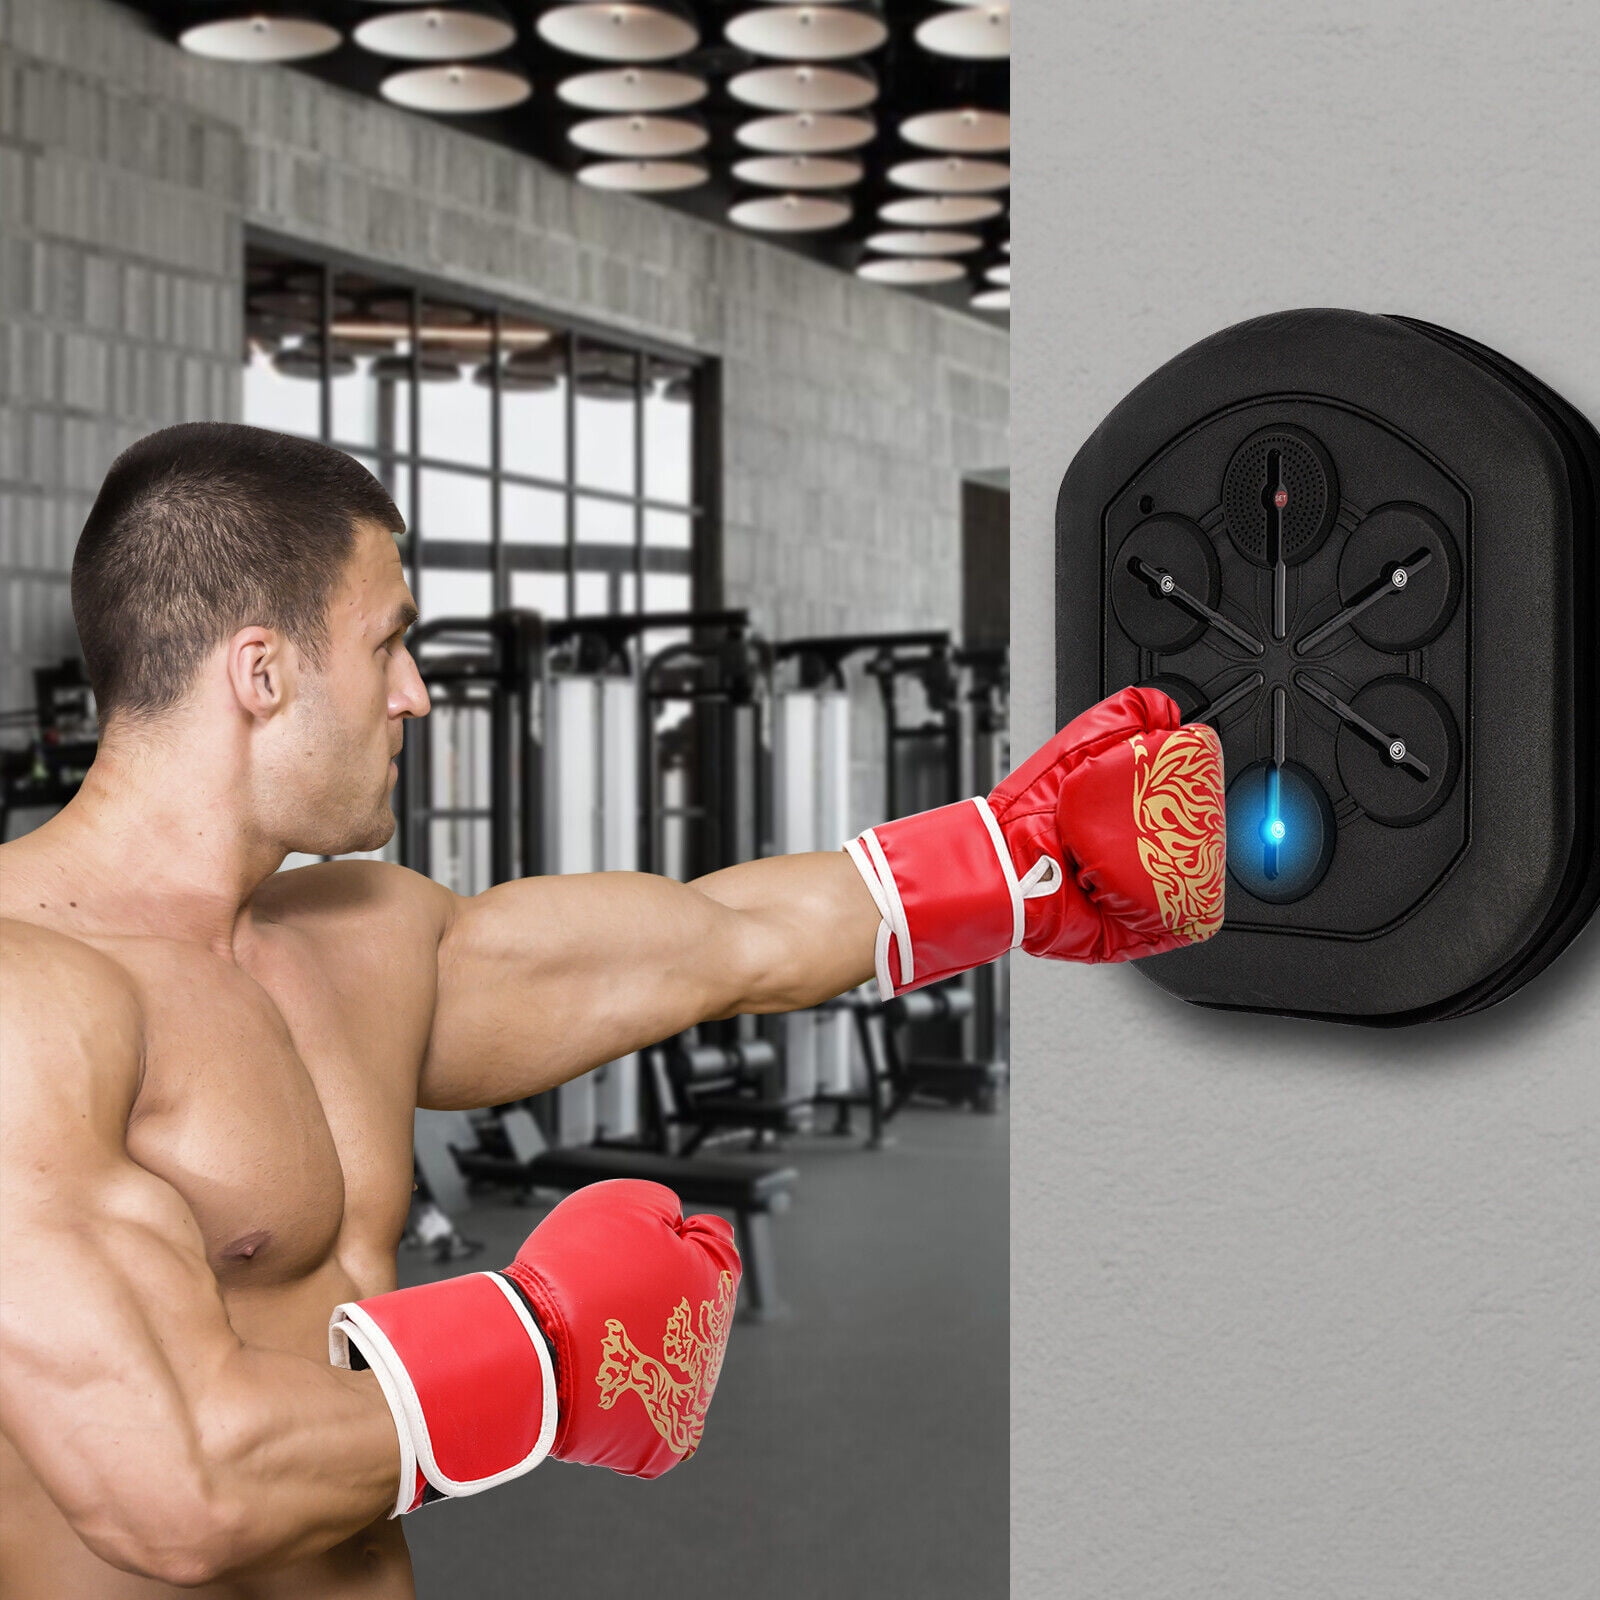  pctaicge Boxing Machine Wall Mounted, Smart Music Boxing  Machine with LED, Electronic Punching Machine with Phone Holder & Boxing  Gloves for Home Exercise Stress Release : Sports & Outdoors